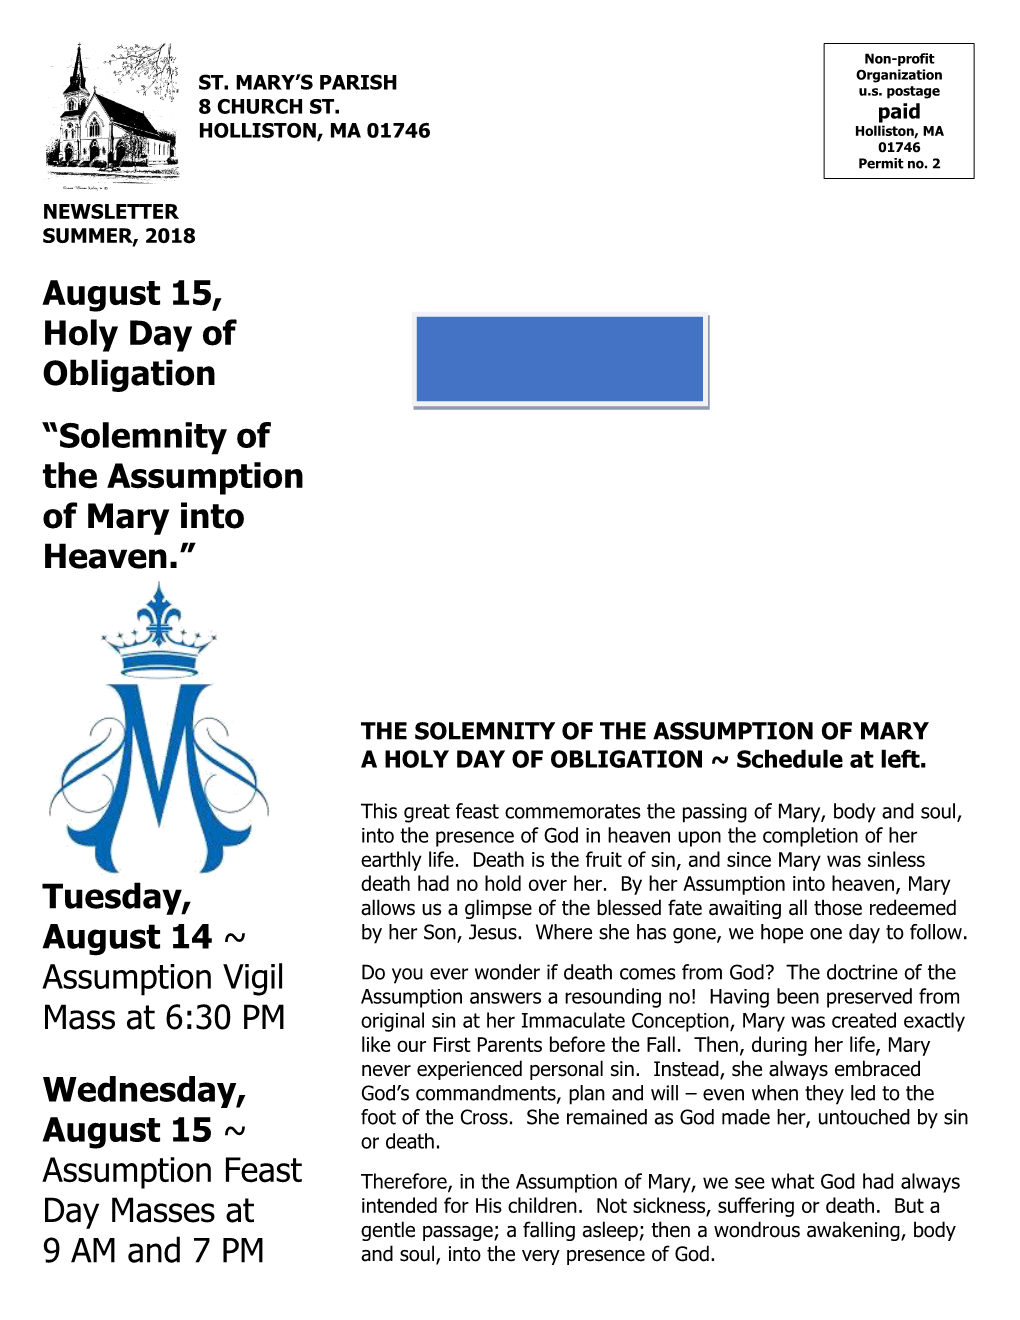 Solemnity of the Assumption of Mary Into Heaven